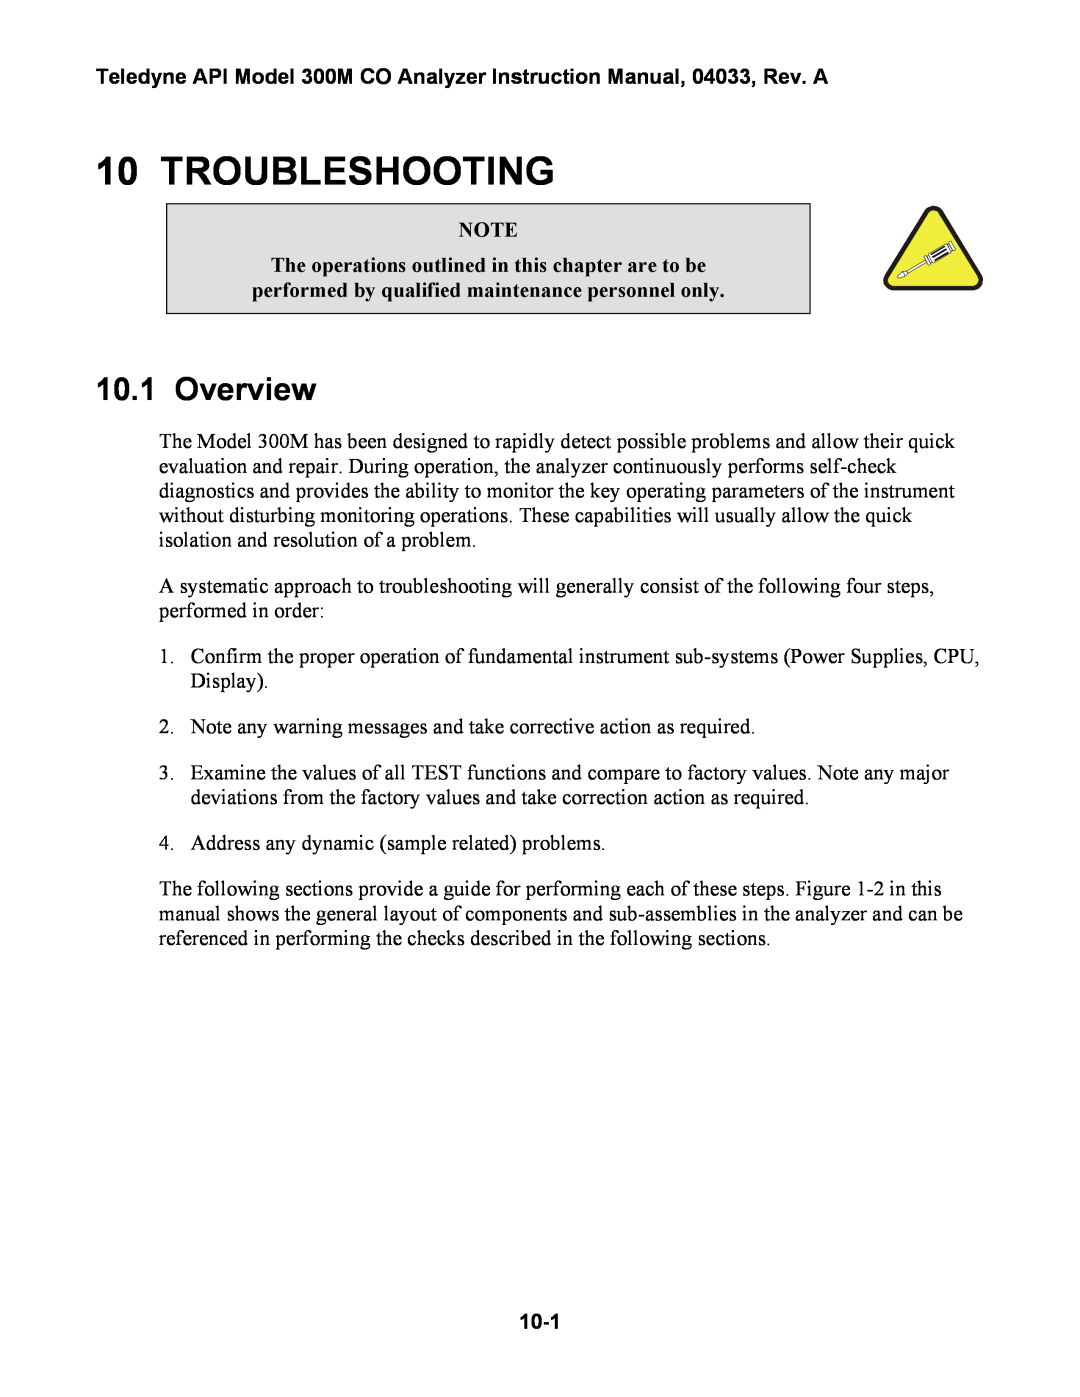 Teledyne 300M instruction manual Troubleshooting, Overview, 10-1 